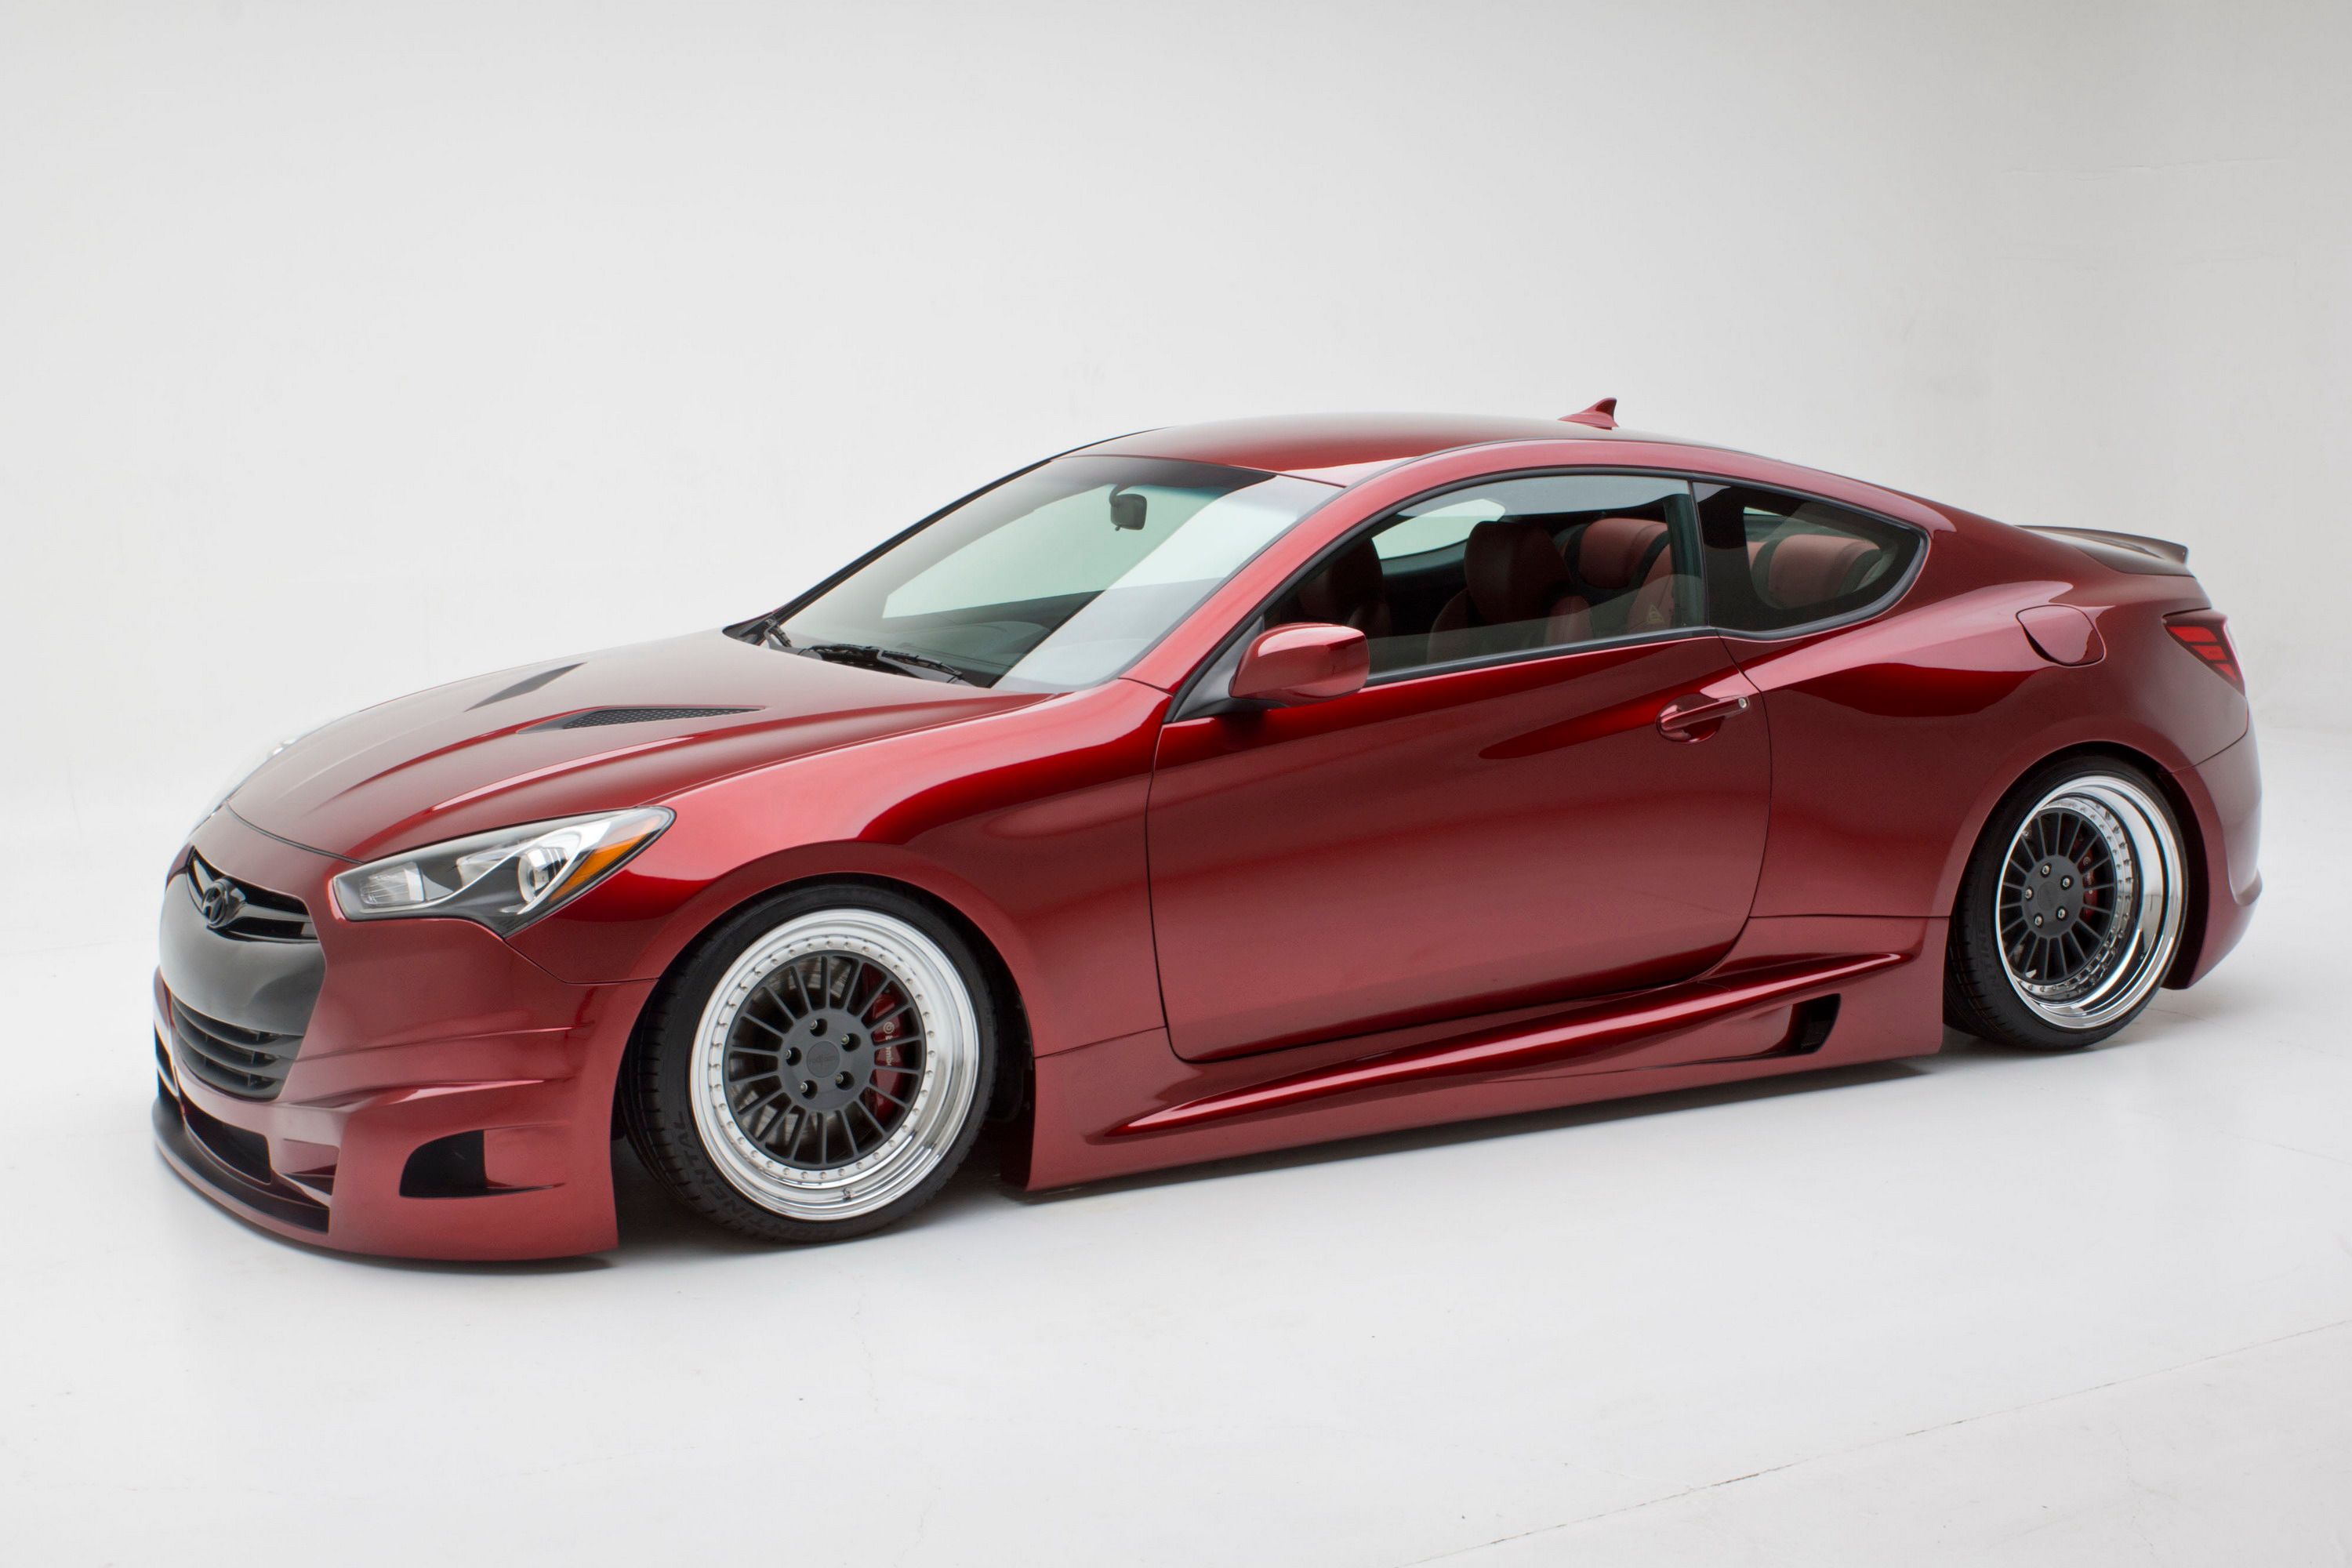 2013 Hyundai Genesis Coupe Turbo Concept by FuelCulture